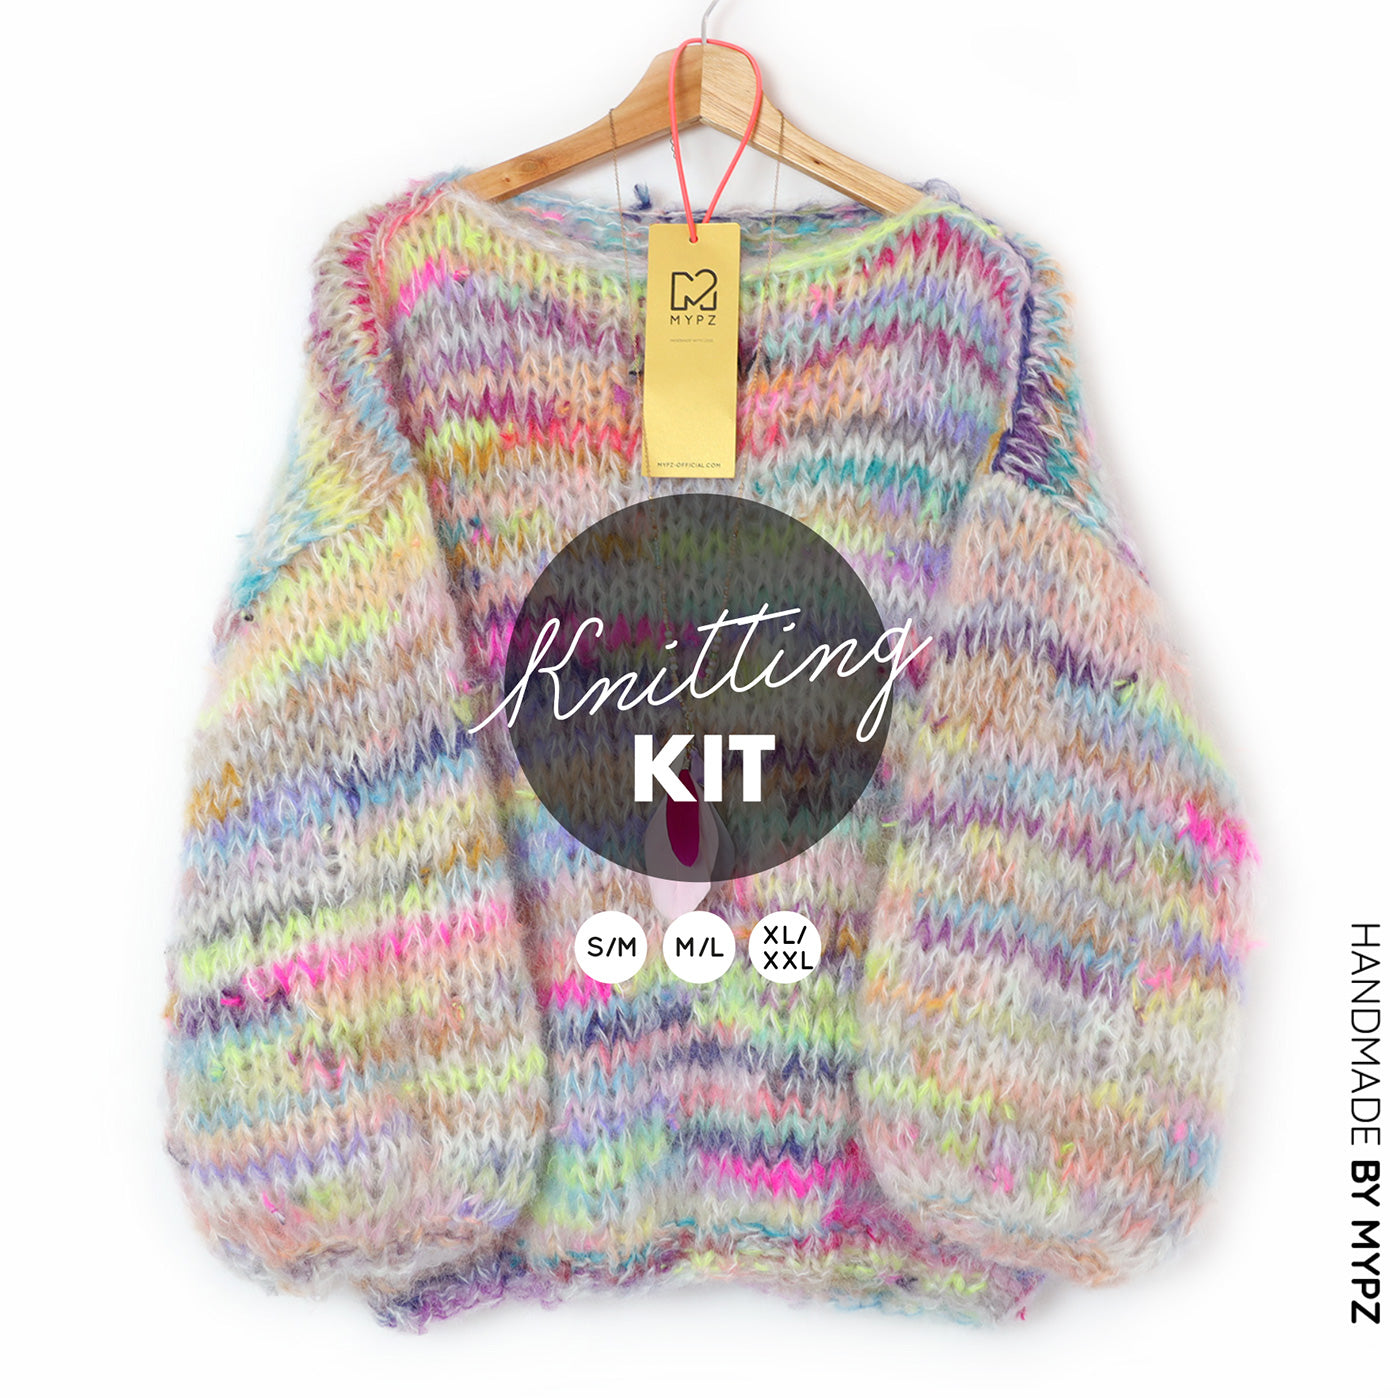 Knitting kits - Sweaters/pullovers